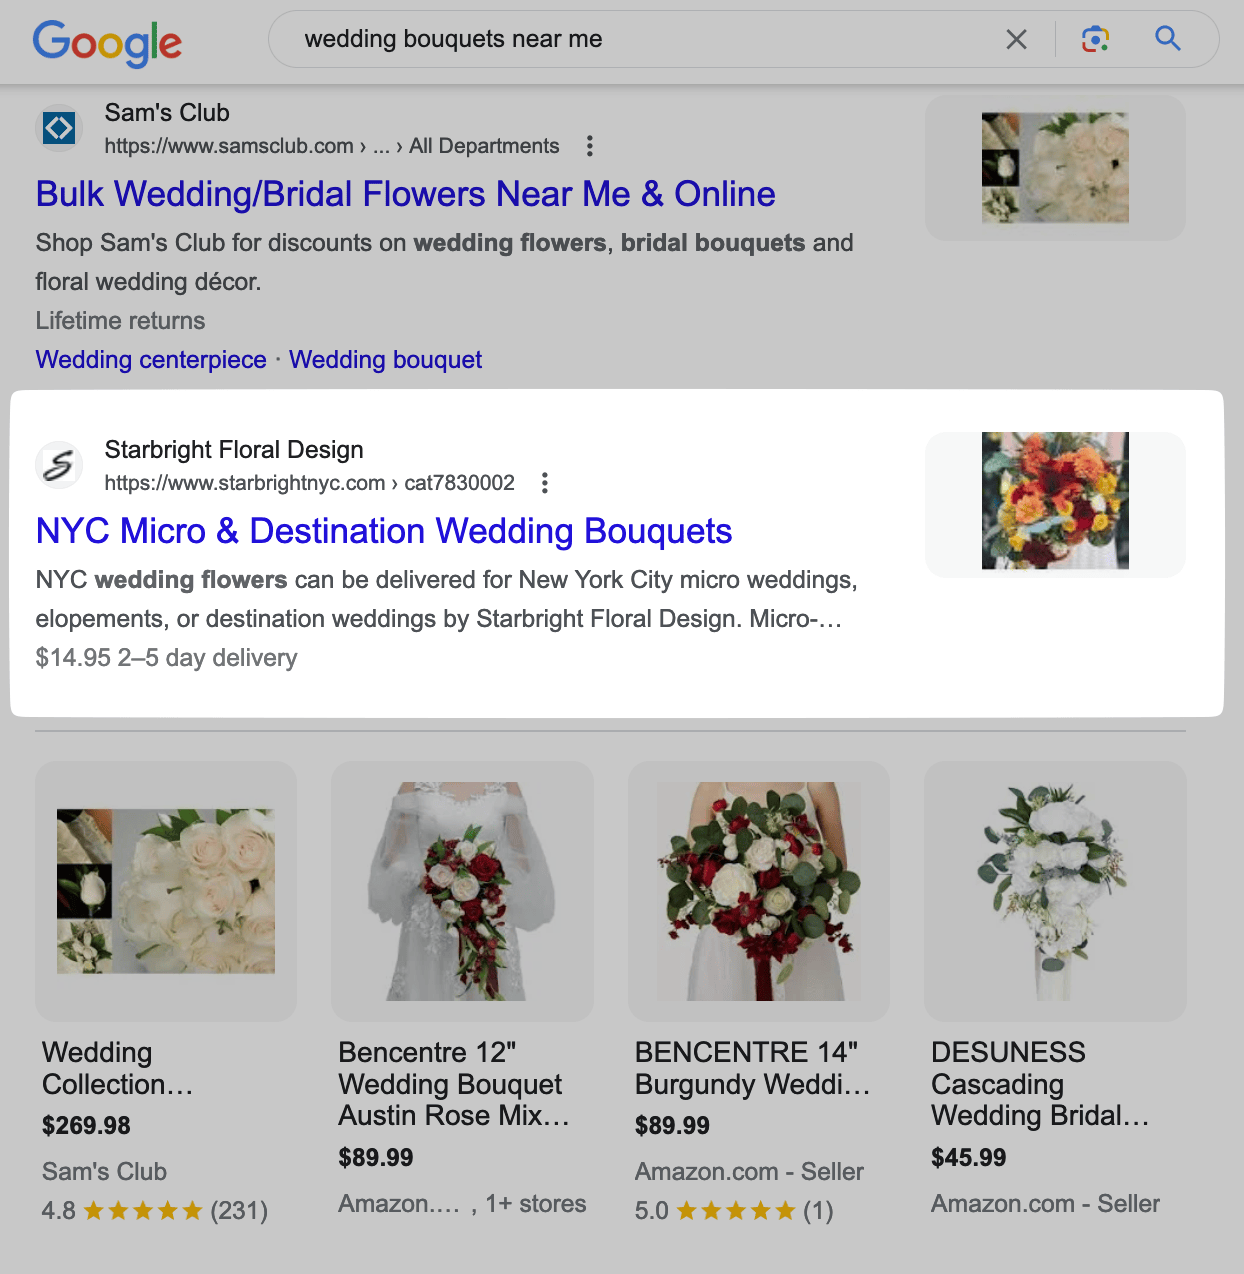 Starbright Floral Design result highlighted on Google SERP for “wedding bouquets near me"